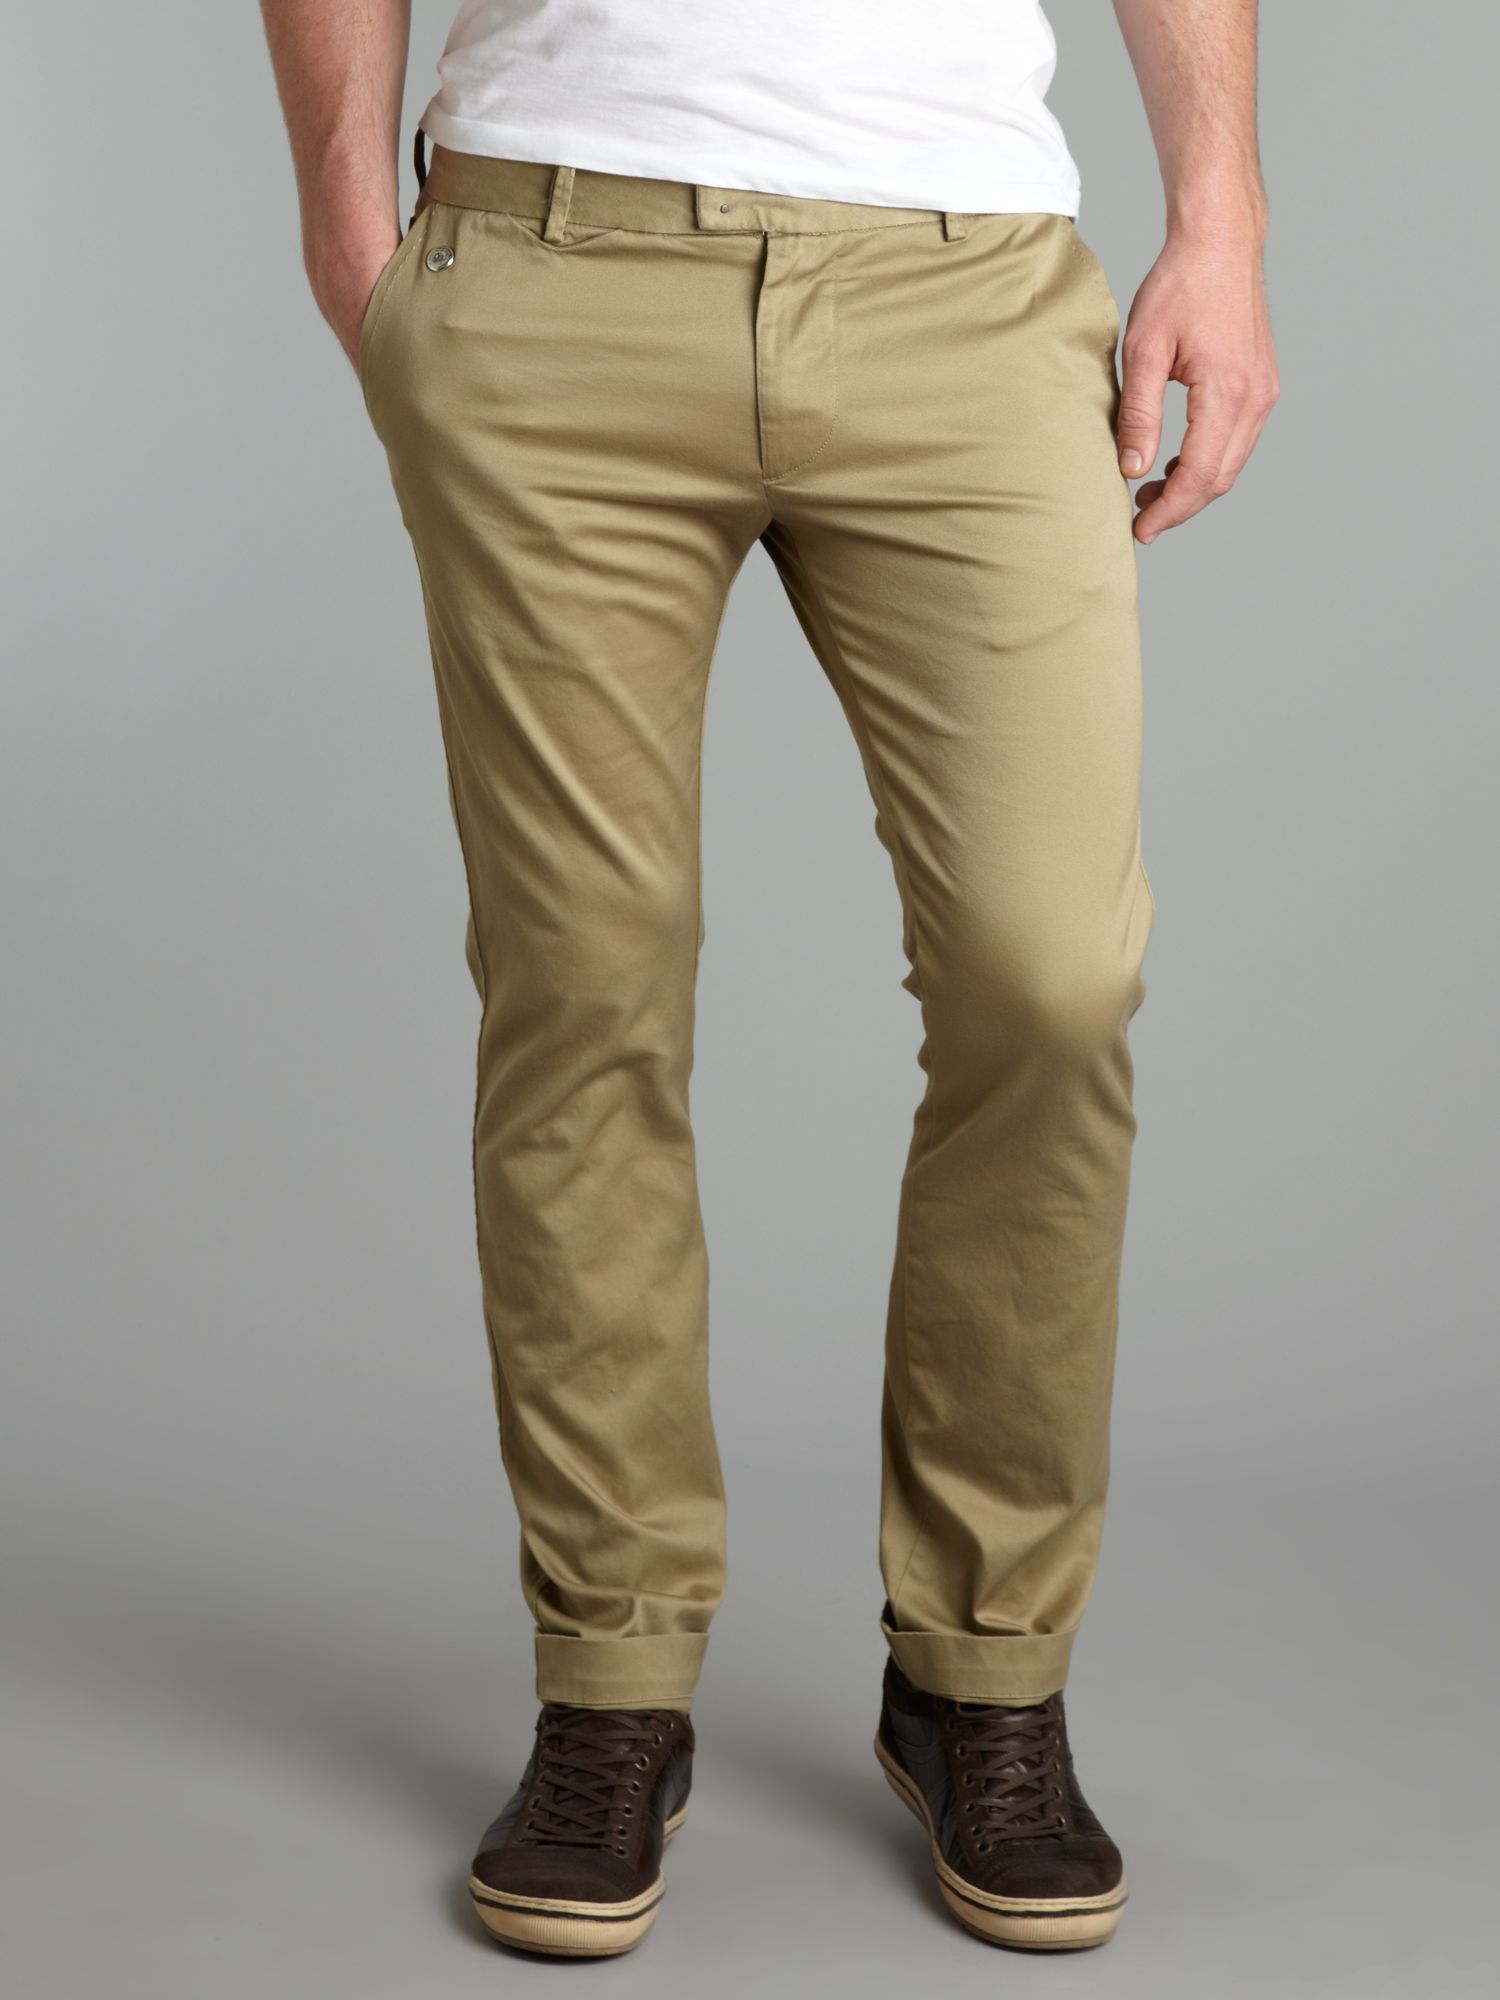 Lyst - Diesel Slim Fit Chino Trousers in Natural for Men